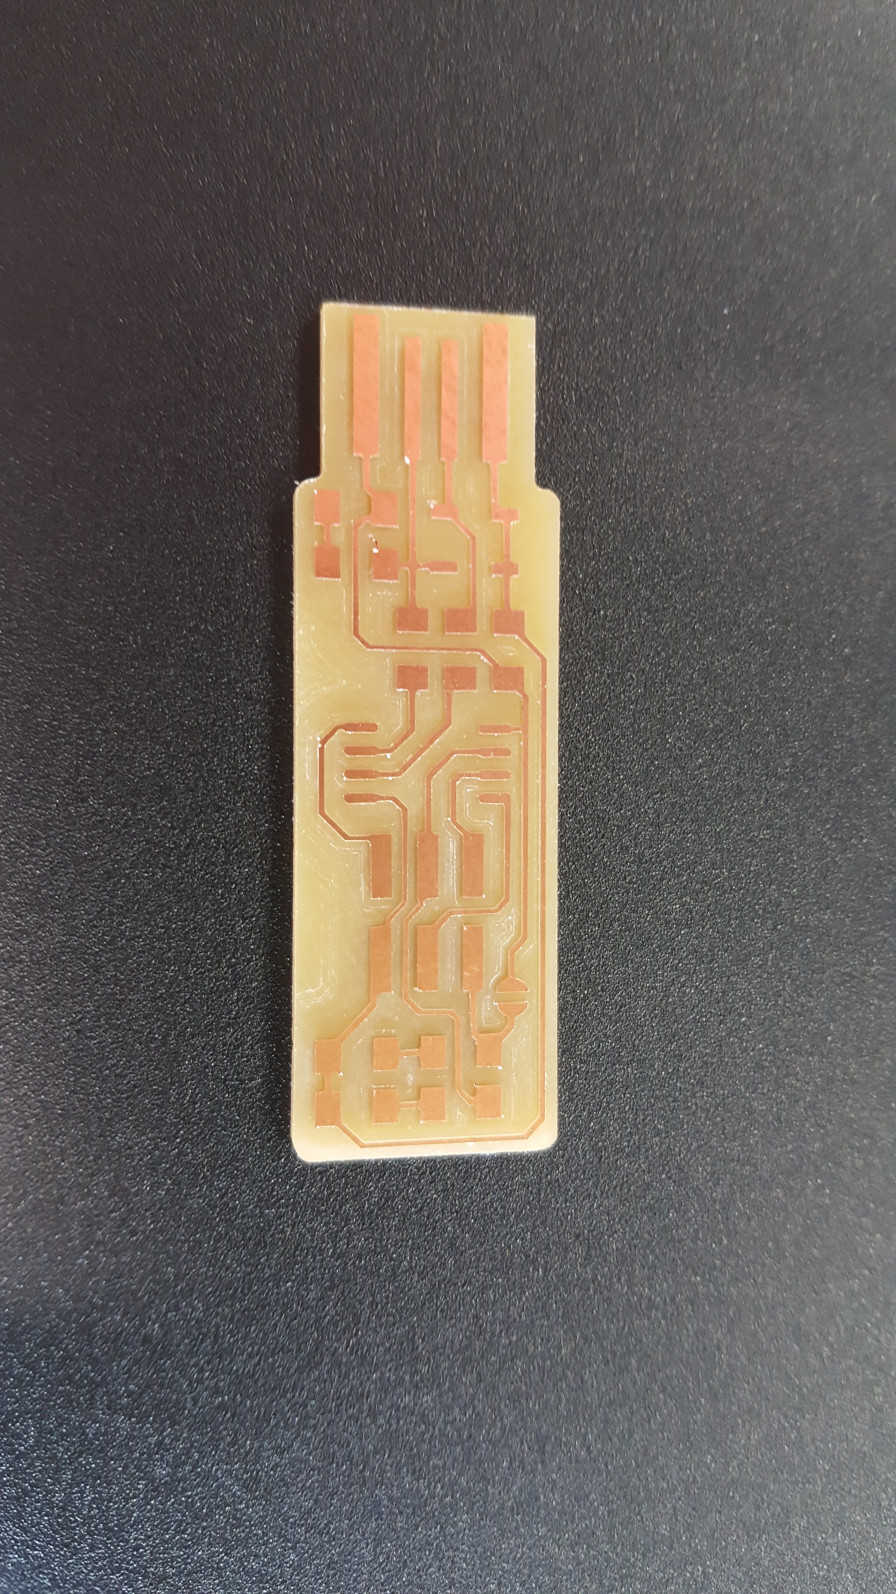 image milled PCB